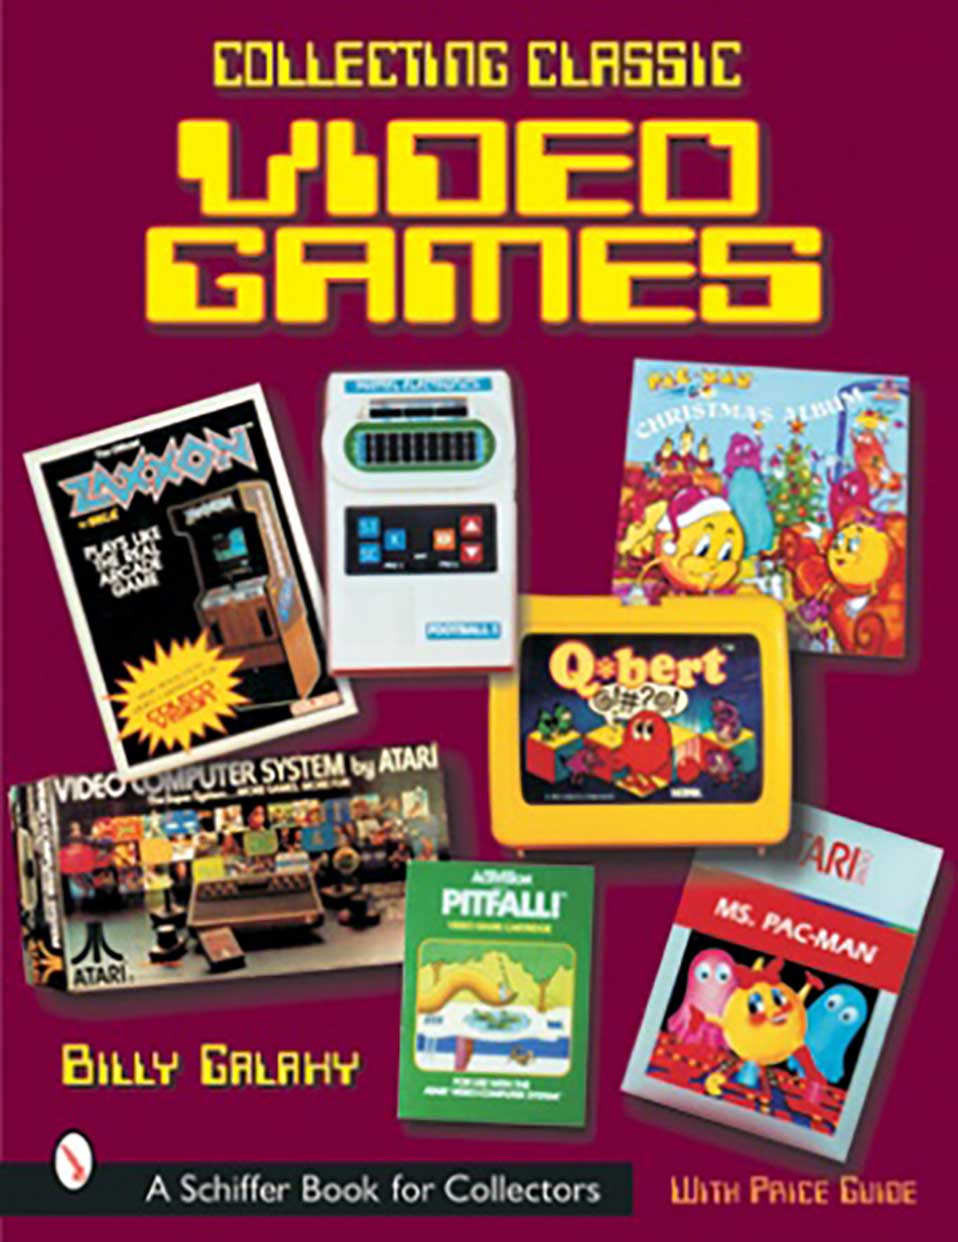 Collectible classic video games